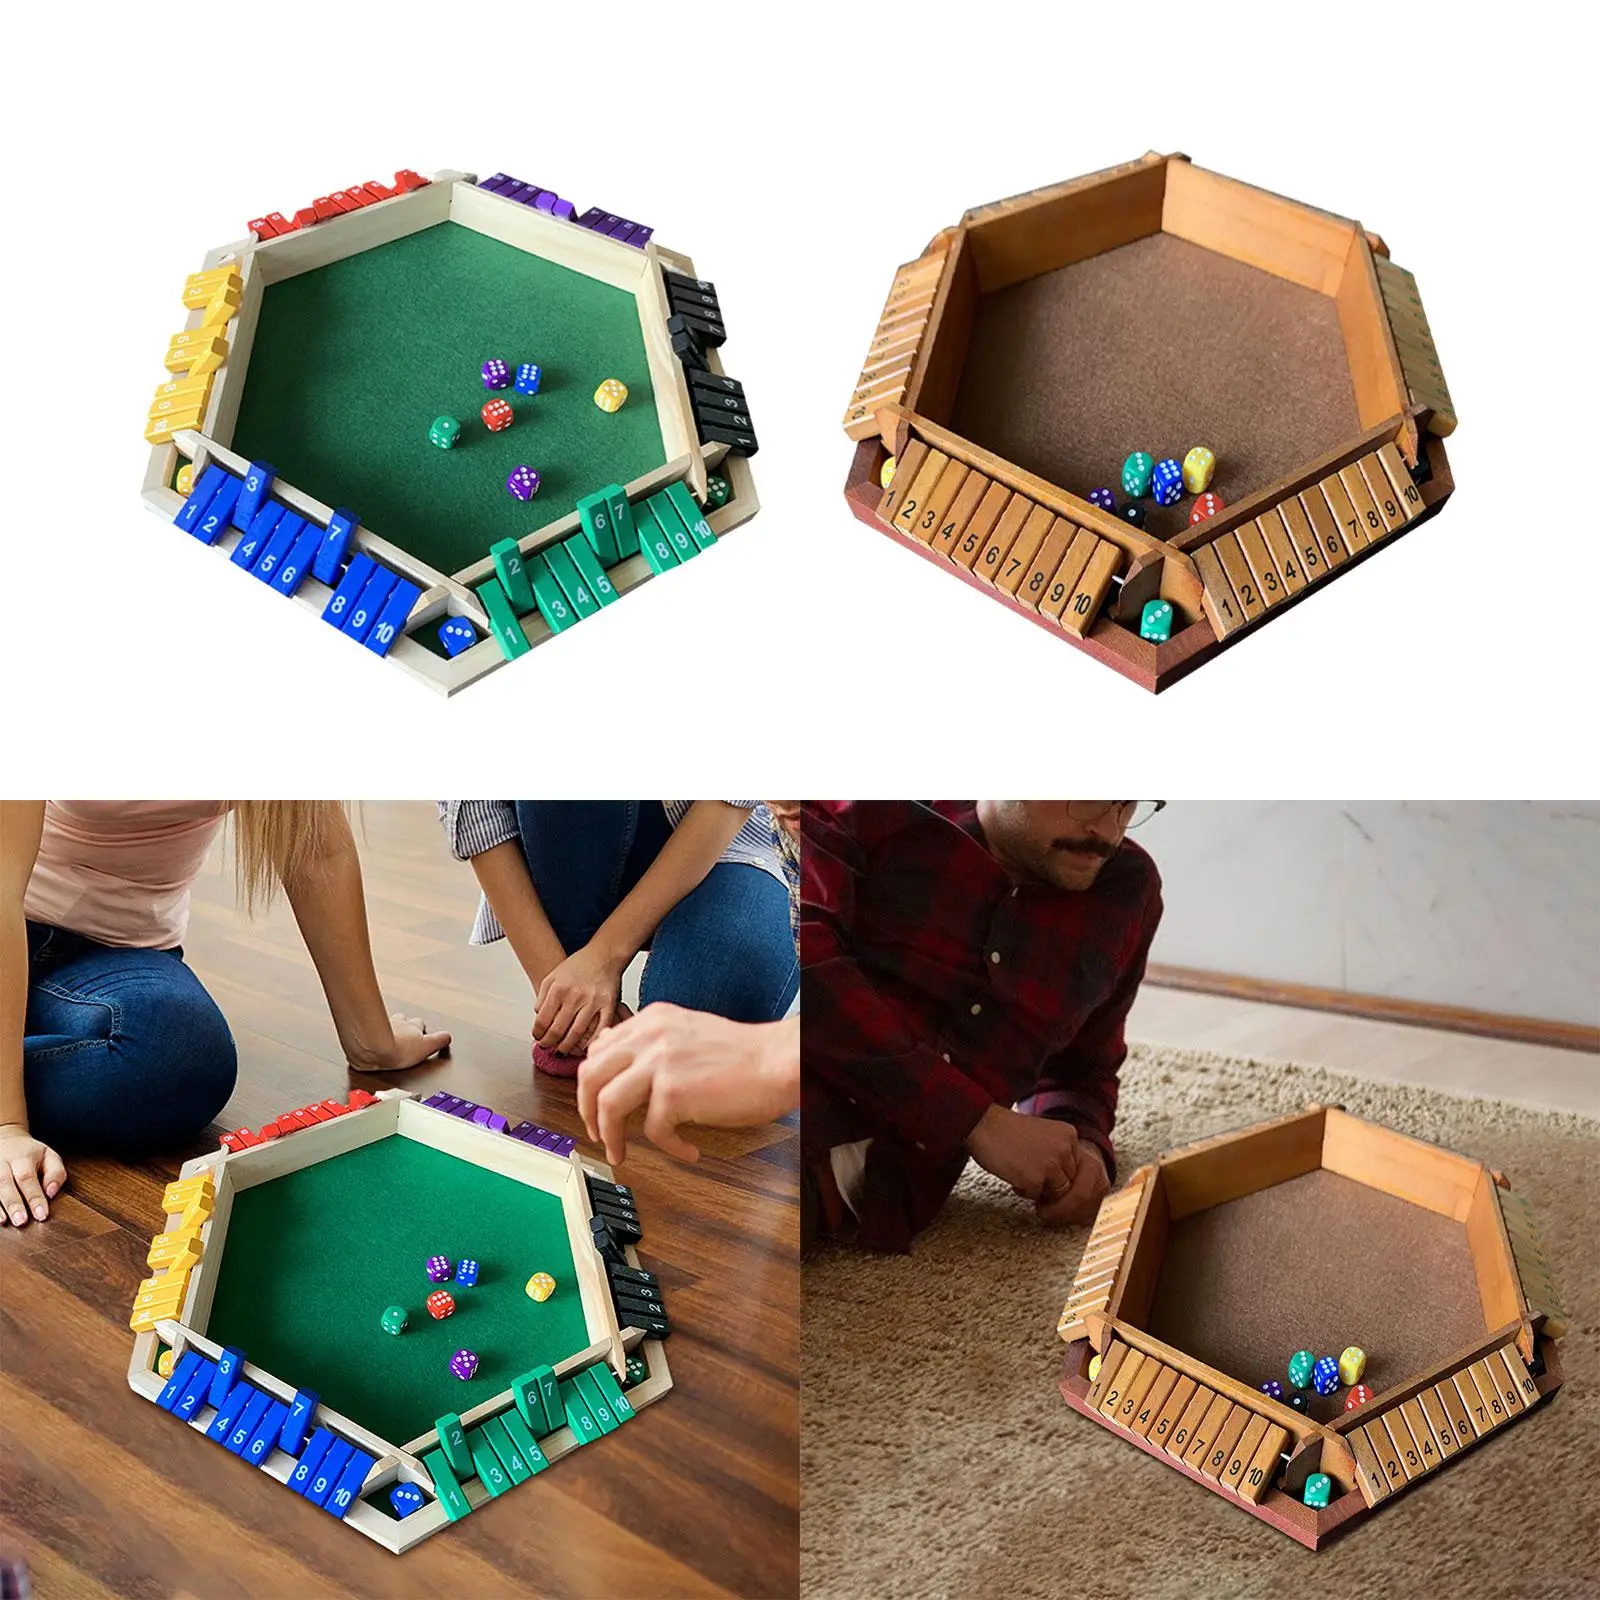 Wooden Table Dice Games Entertainment 2-6 Players Board Chess Game Wooden Table Board for Party Gathering Adults Pub Family